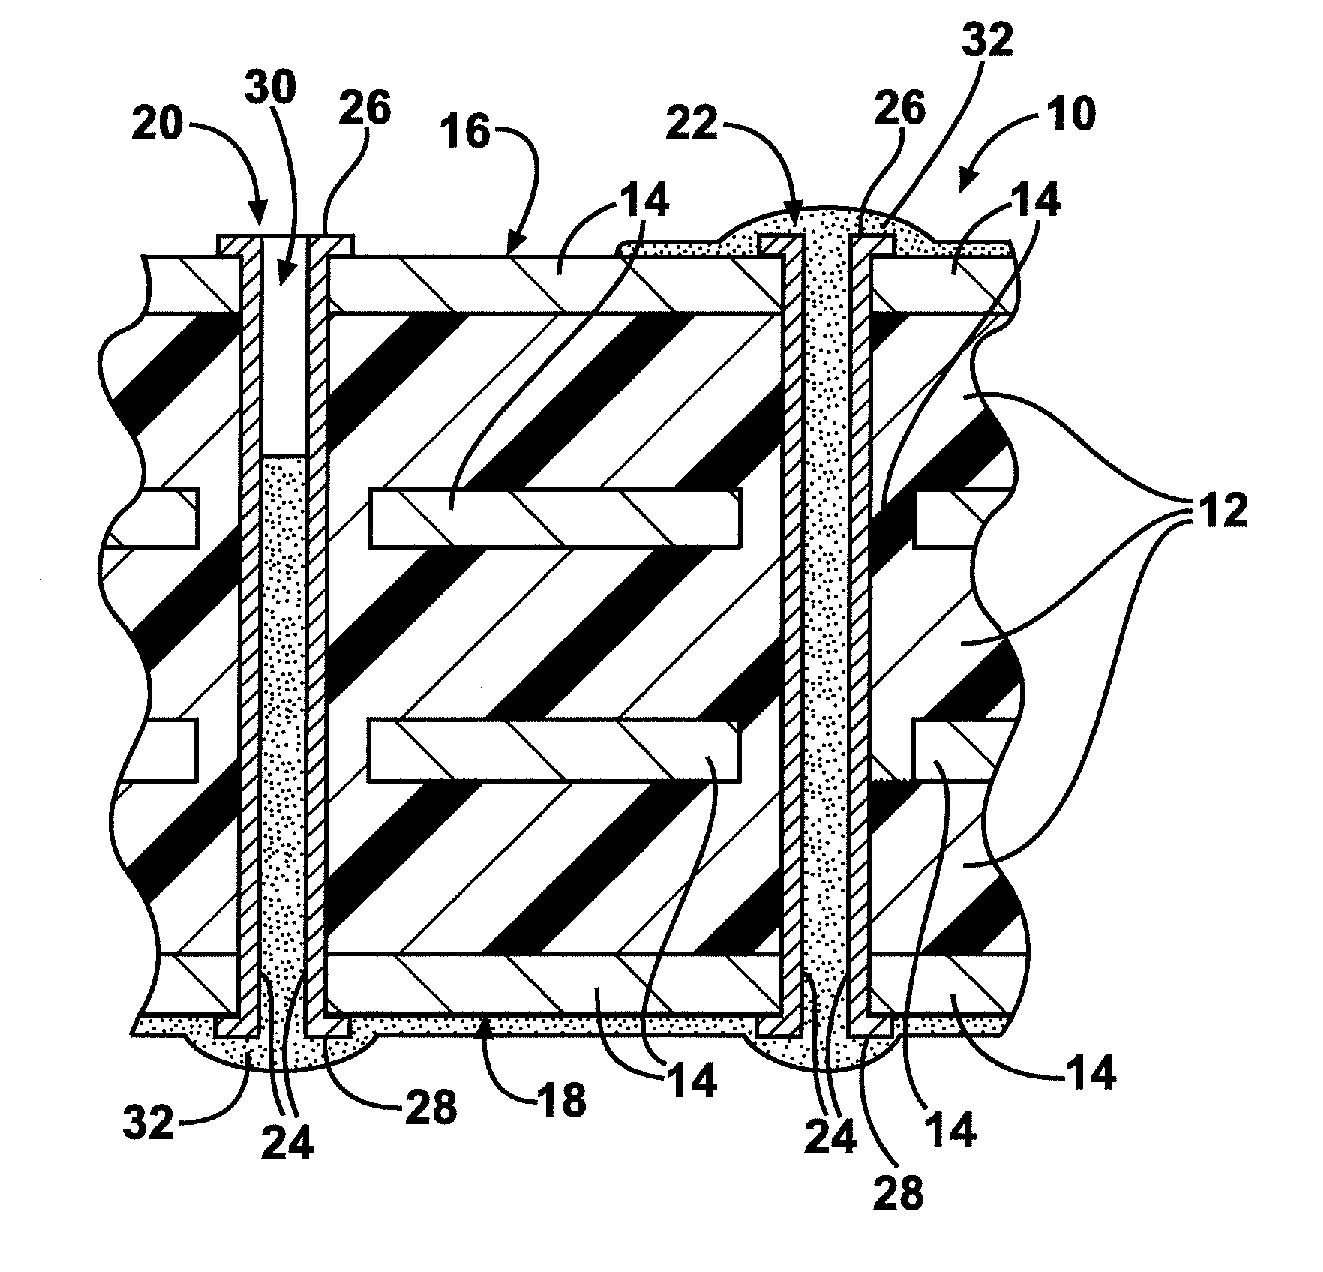 Method of manufacturing a printed circuit board